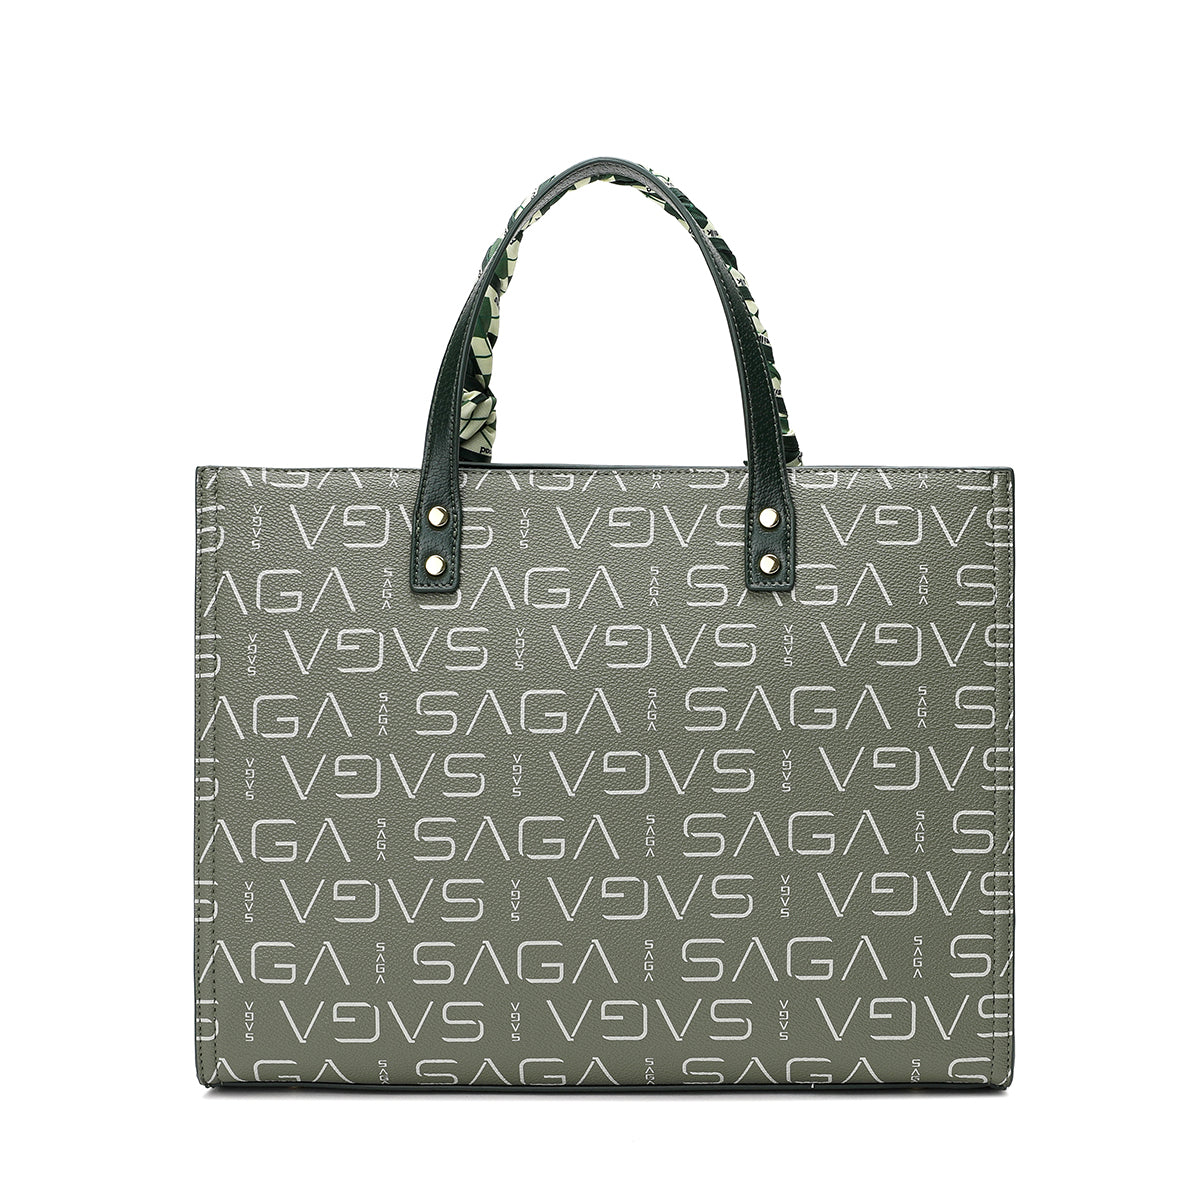 An elegant and luxurious bag with a modern design, wide microfiber, 33 cm wide